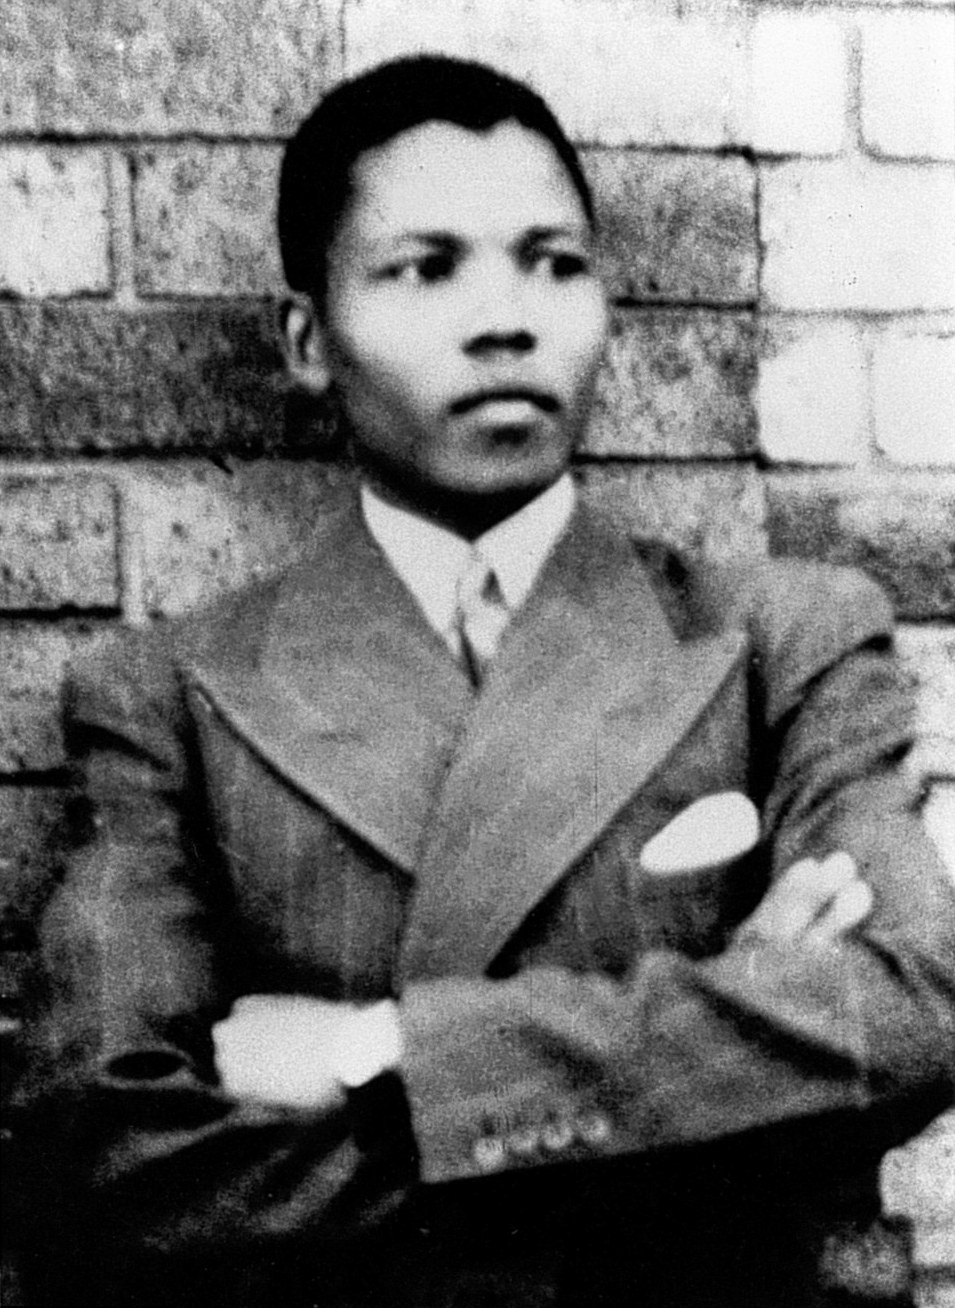 Photo of a young Nelson Mandela